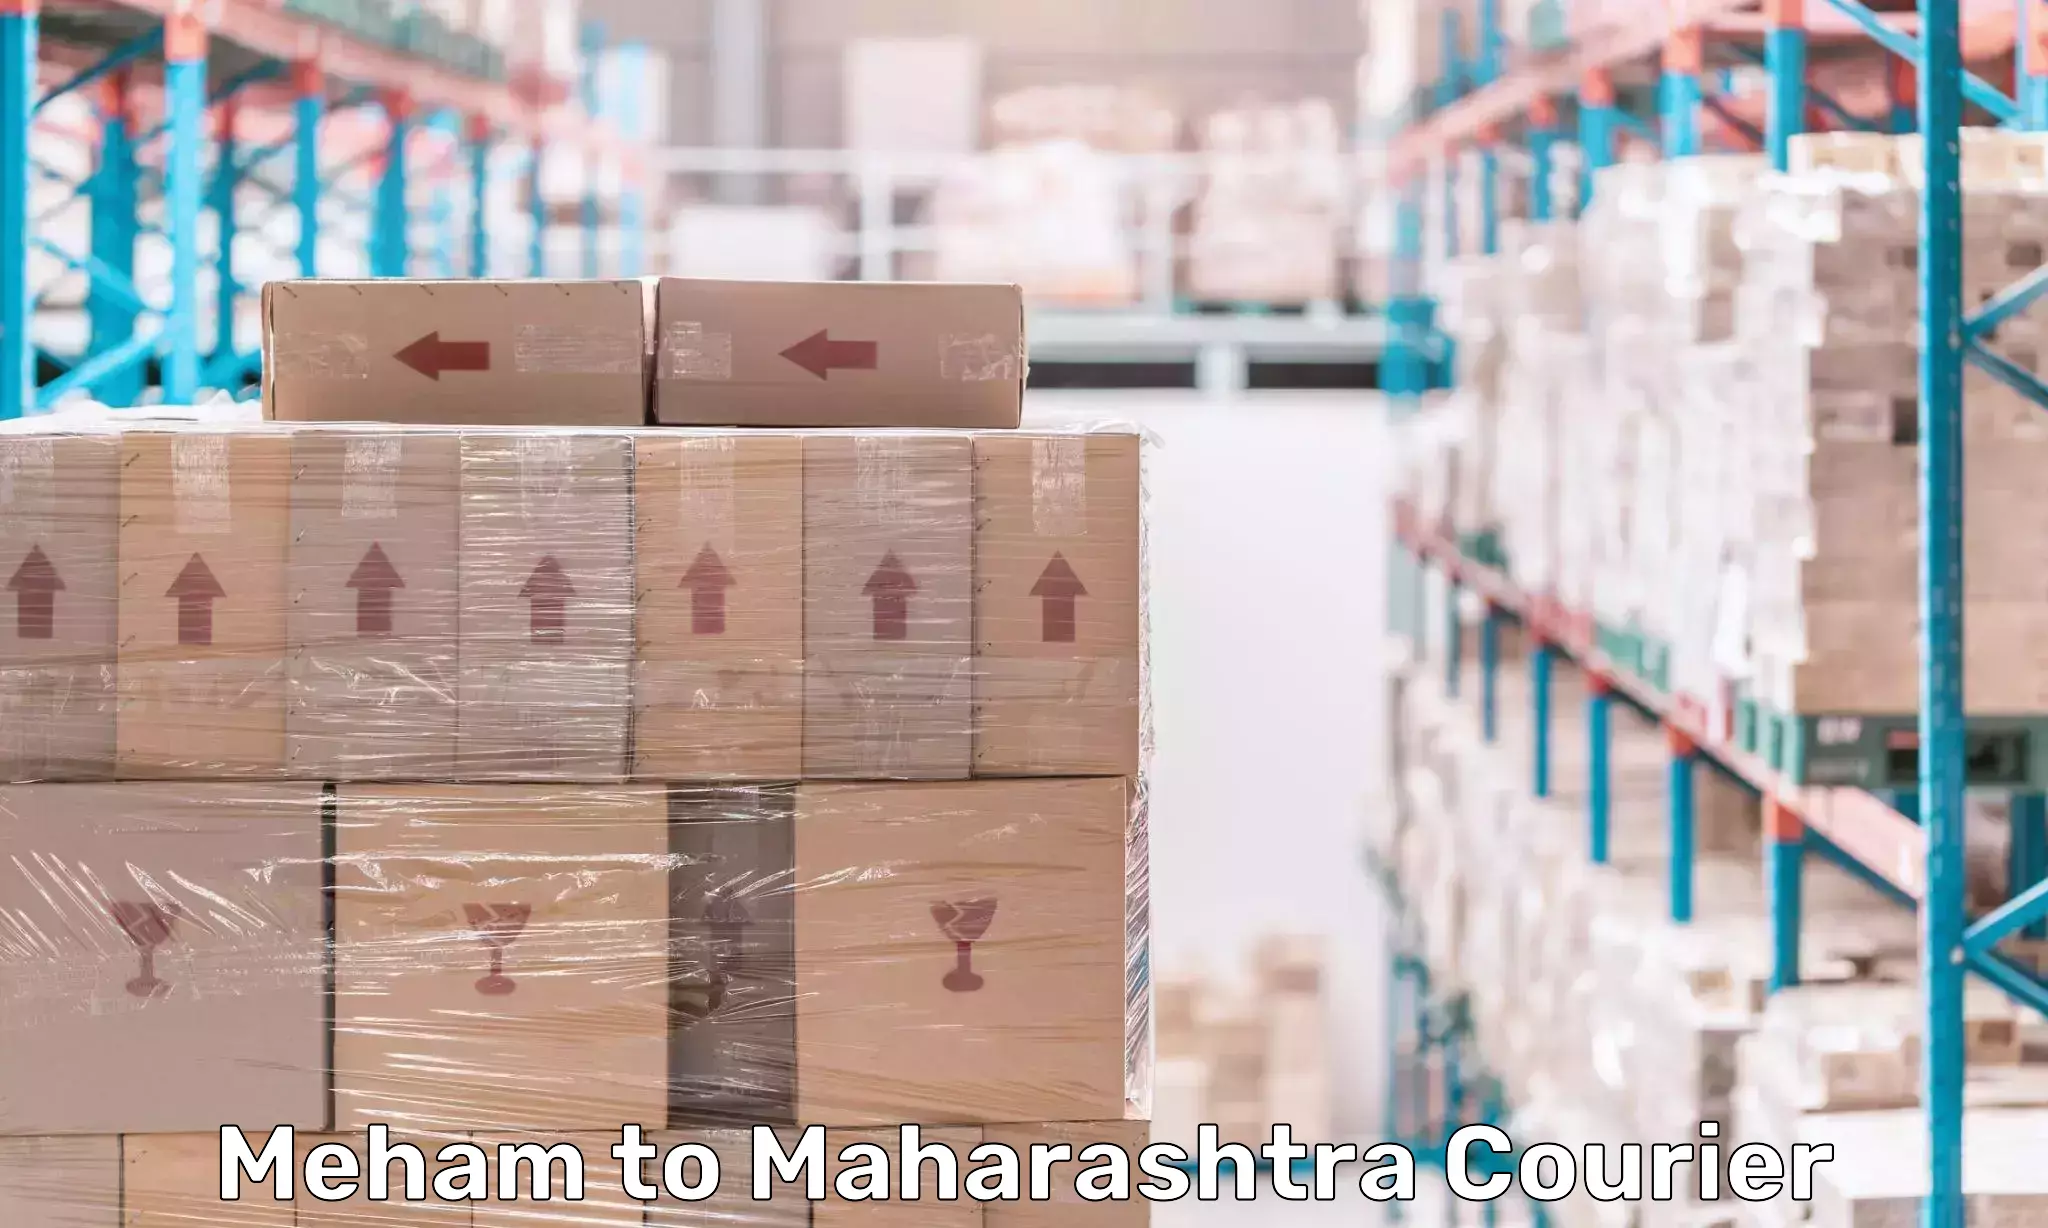 Local delivery service Meham to Maharashtra